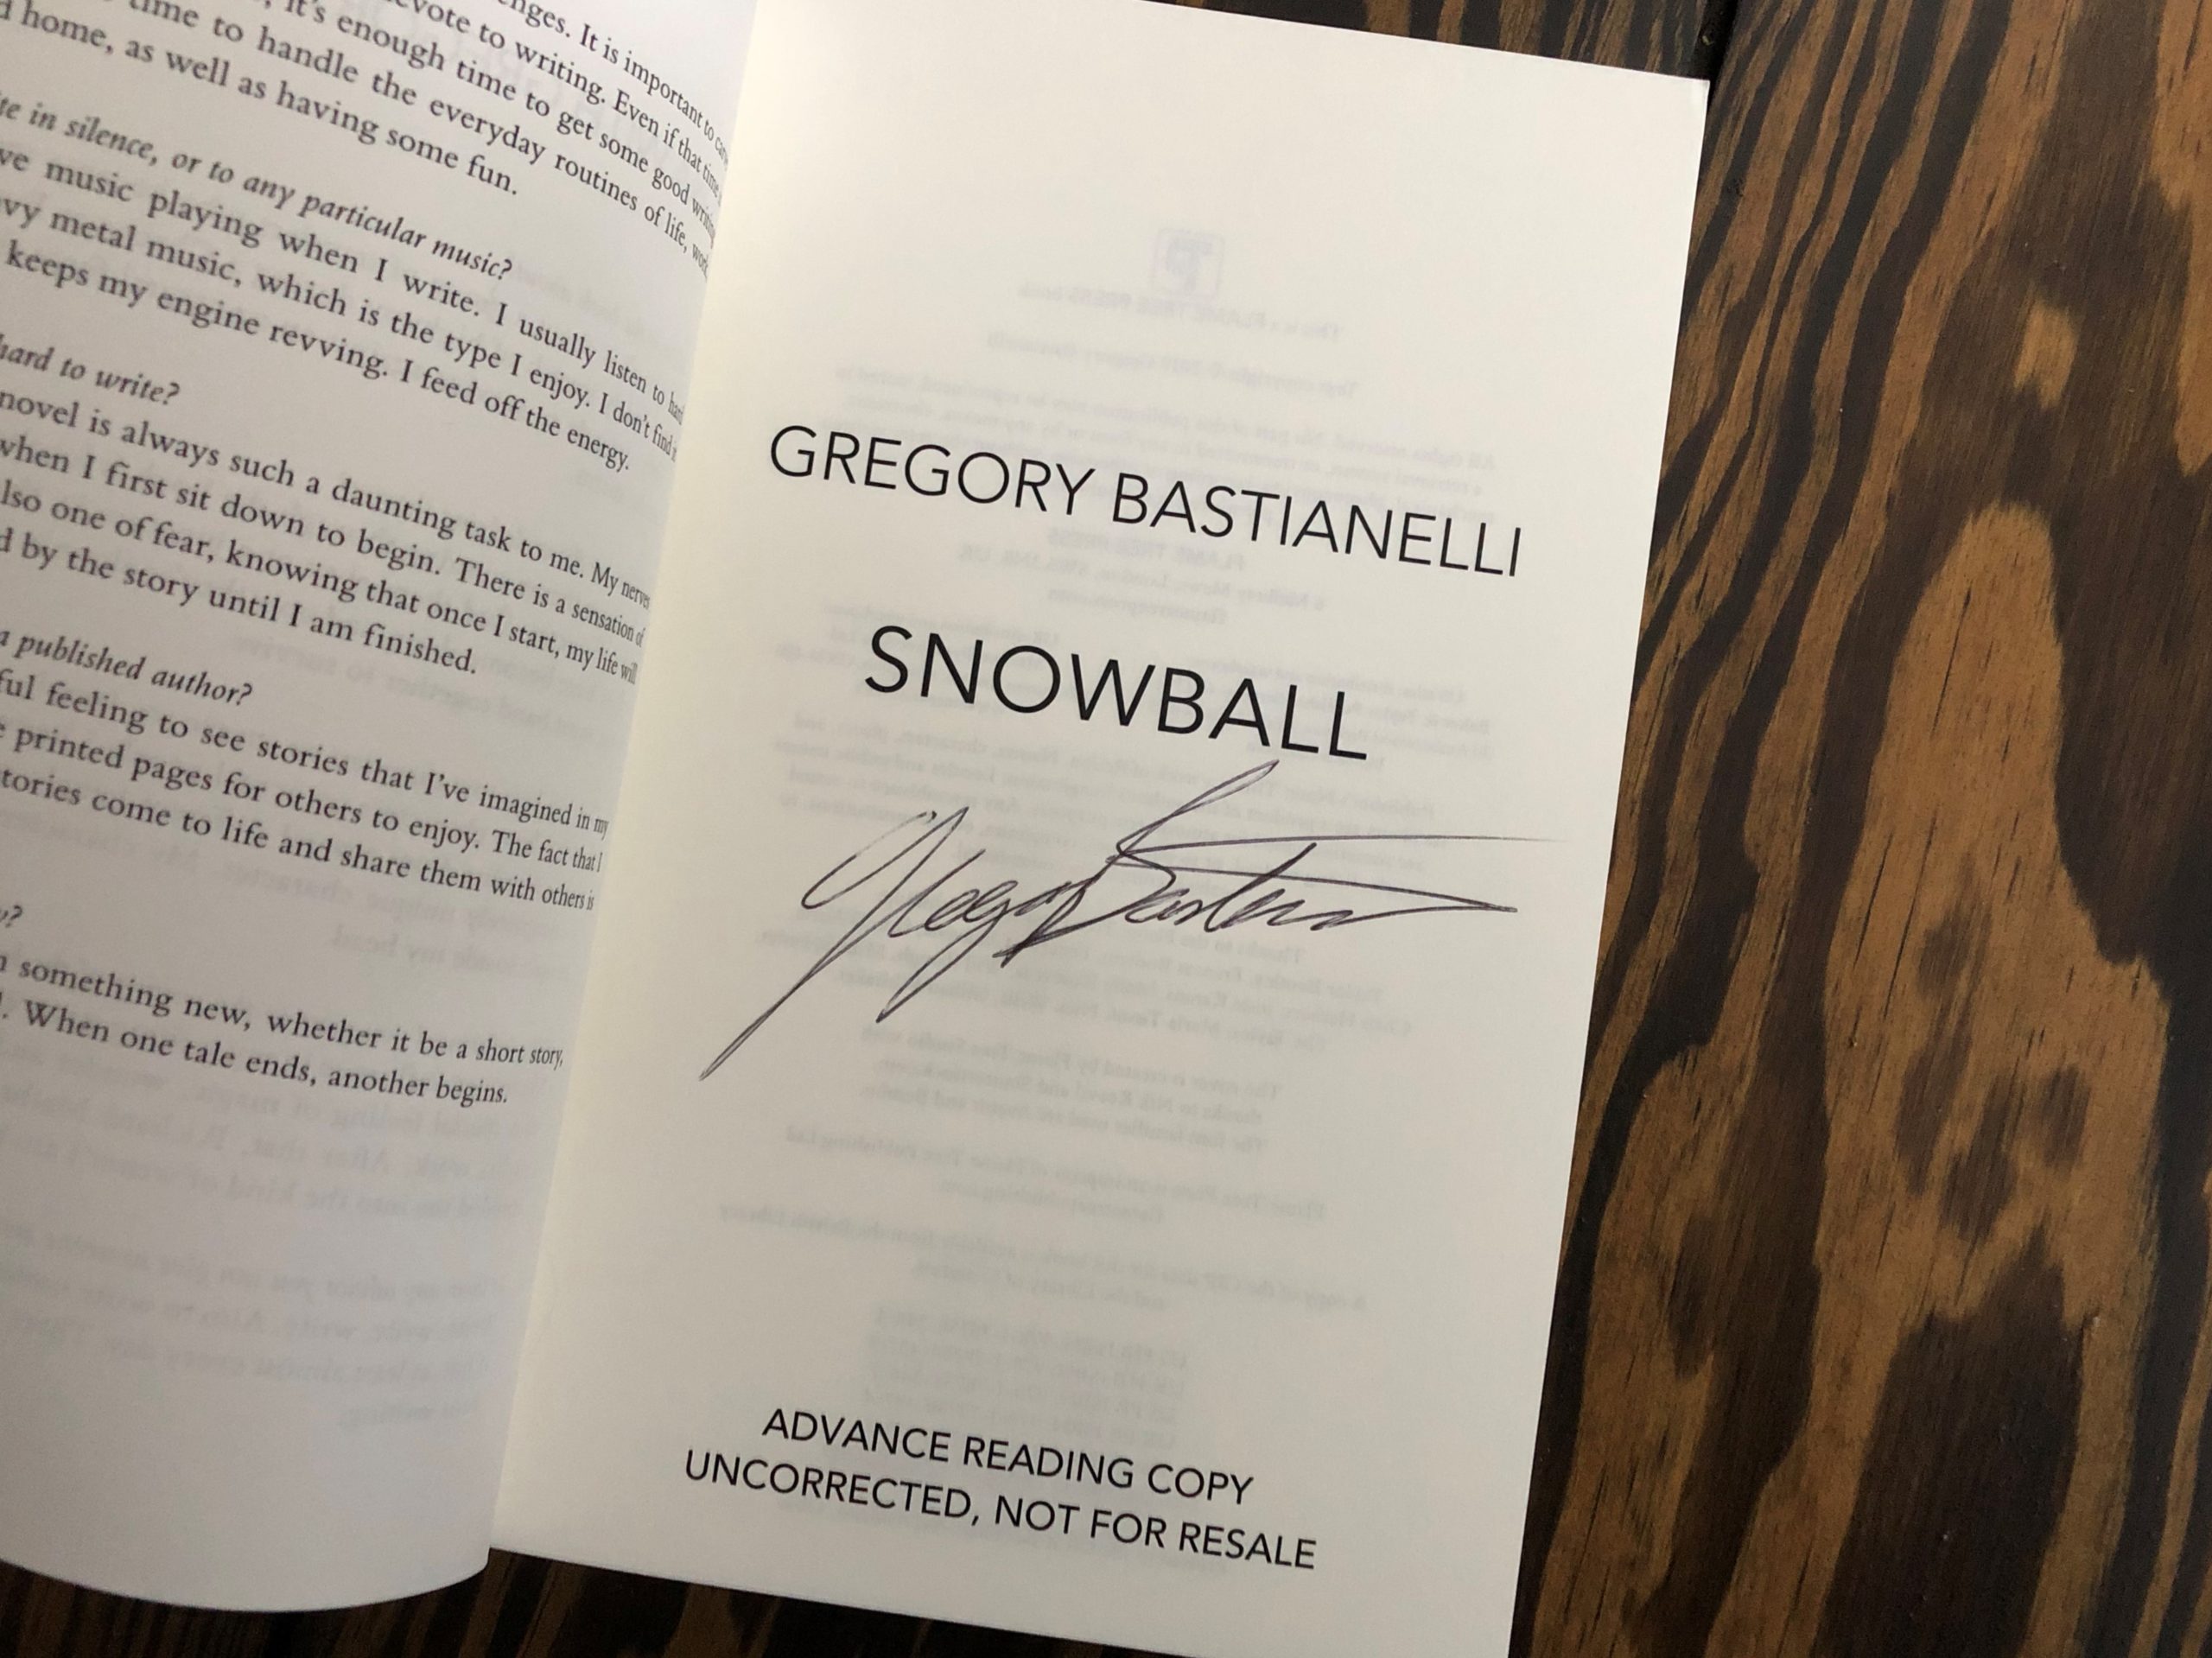 1 Signed Copy of Snowball by Gregory Bastianelli